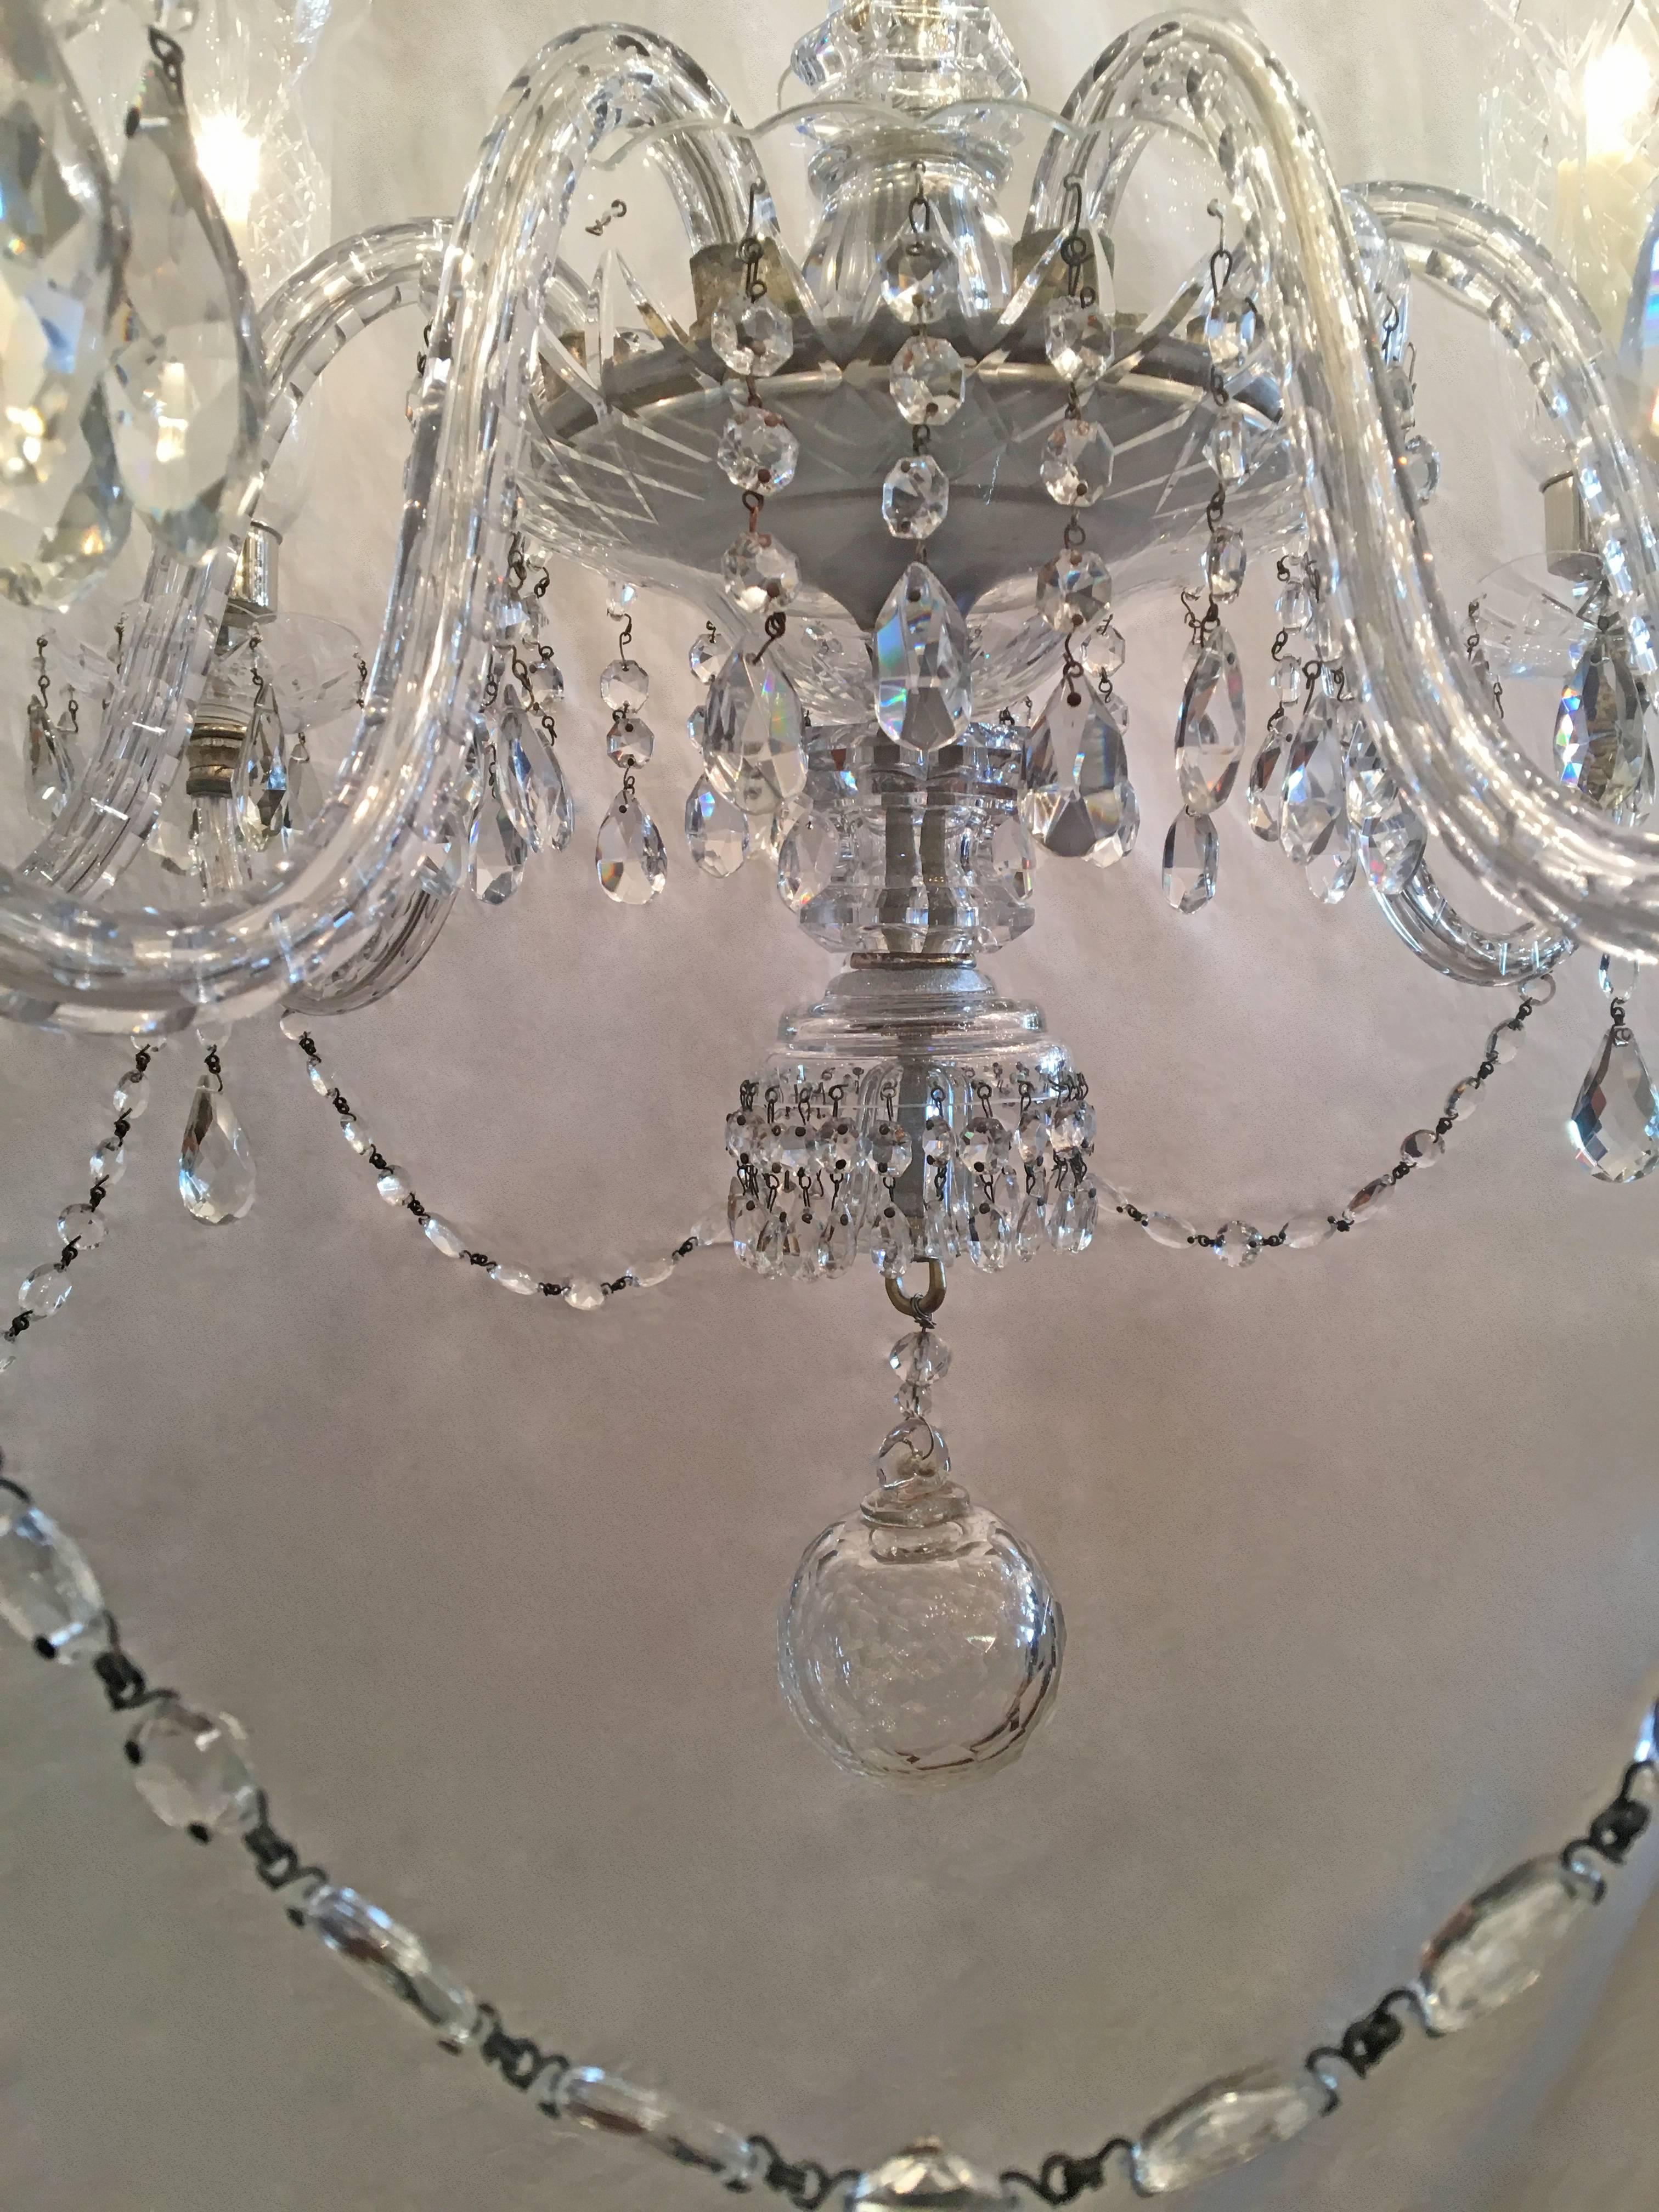 This grand early 20th century George 2nd style Irish crystal chandelier has seven arms with hand-cut detailed silver plated hurricane shades. The chandelier has been rewired with porcelain sockets.
Chain and canopy are included with the chandelier.